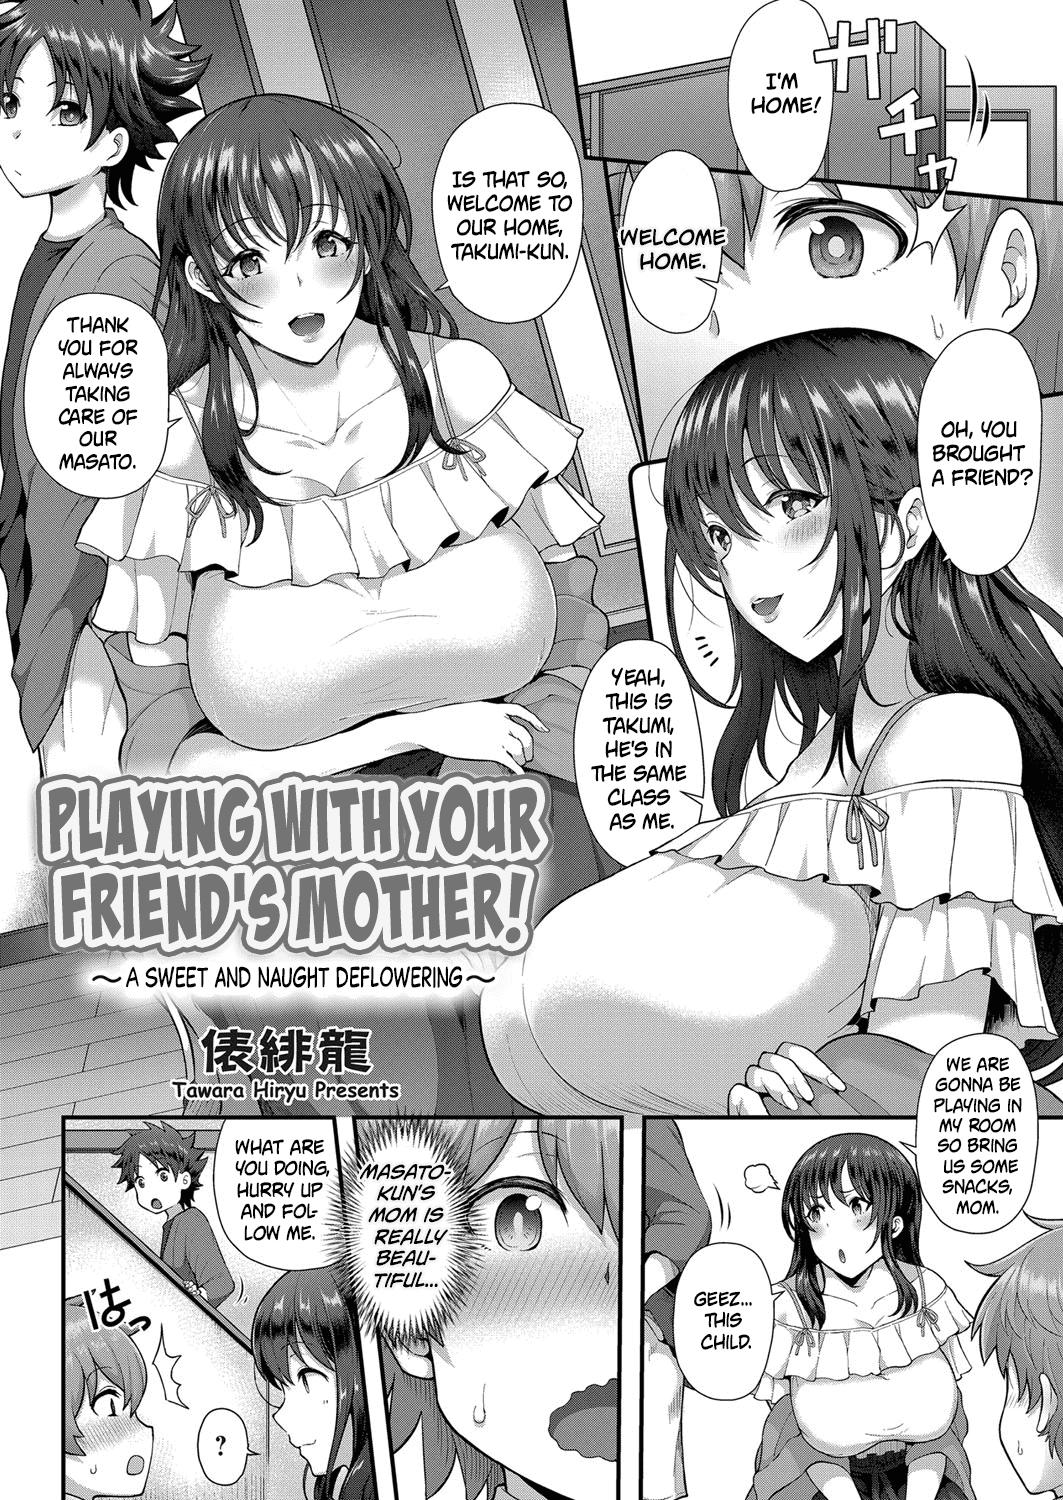 Doggy Style [Tawara Hiryuu] Tomo Haha to Asobo! ~Amakute Ecchi na Fudeoroshi~ | Playing With Your Friend's Mother! ~A Sweet and Naught Deflowering~ (COMIC Grape Vol. 68) [English] [At4r1] Amateur Porn - Page 2